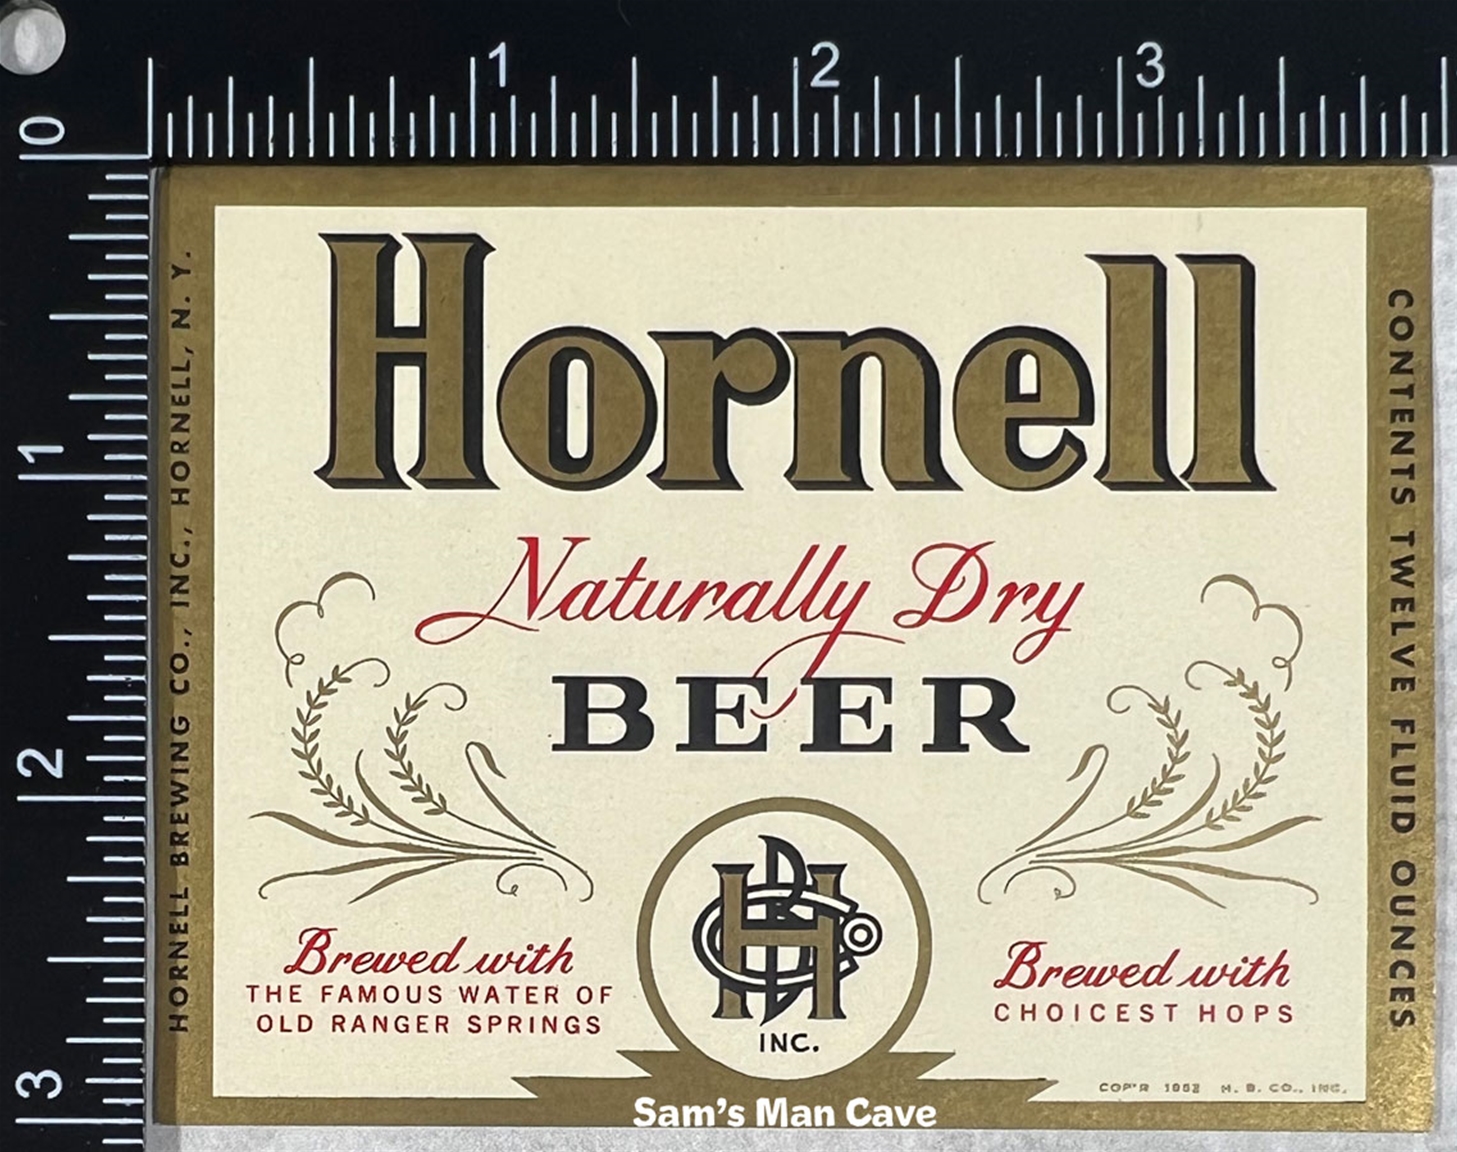 Hornell Naturally Dry Beer Label